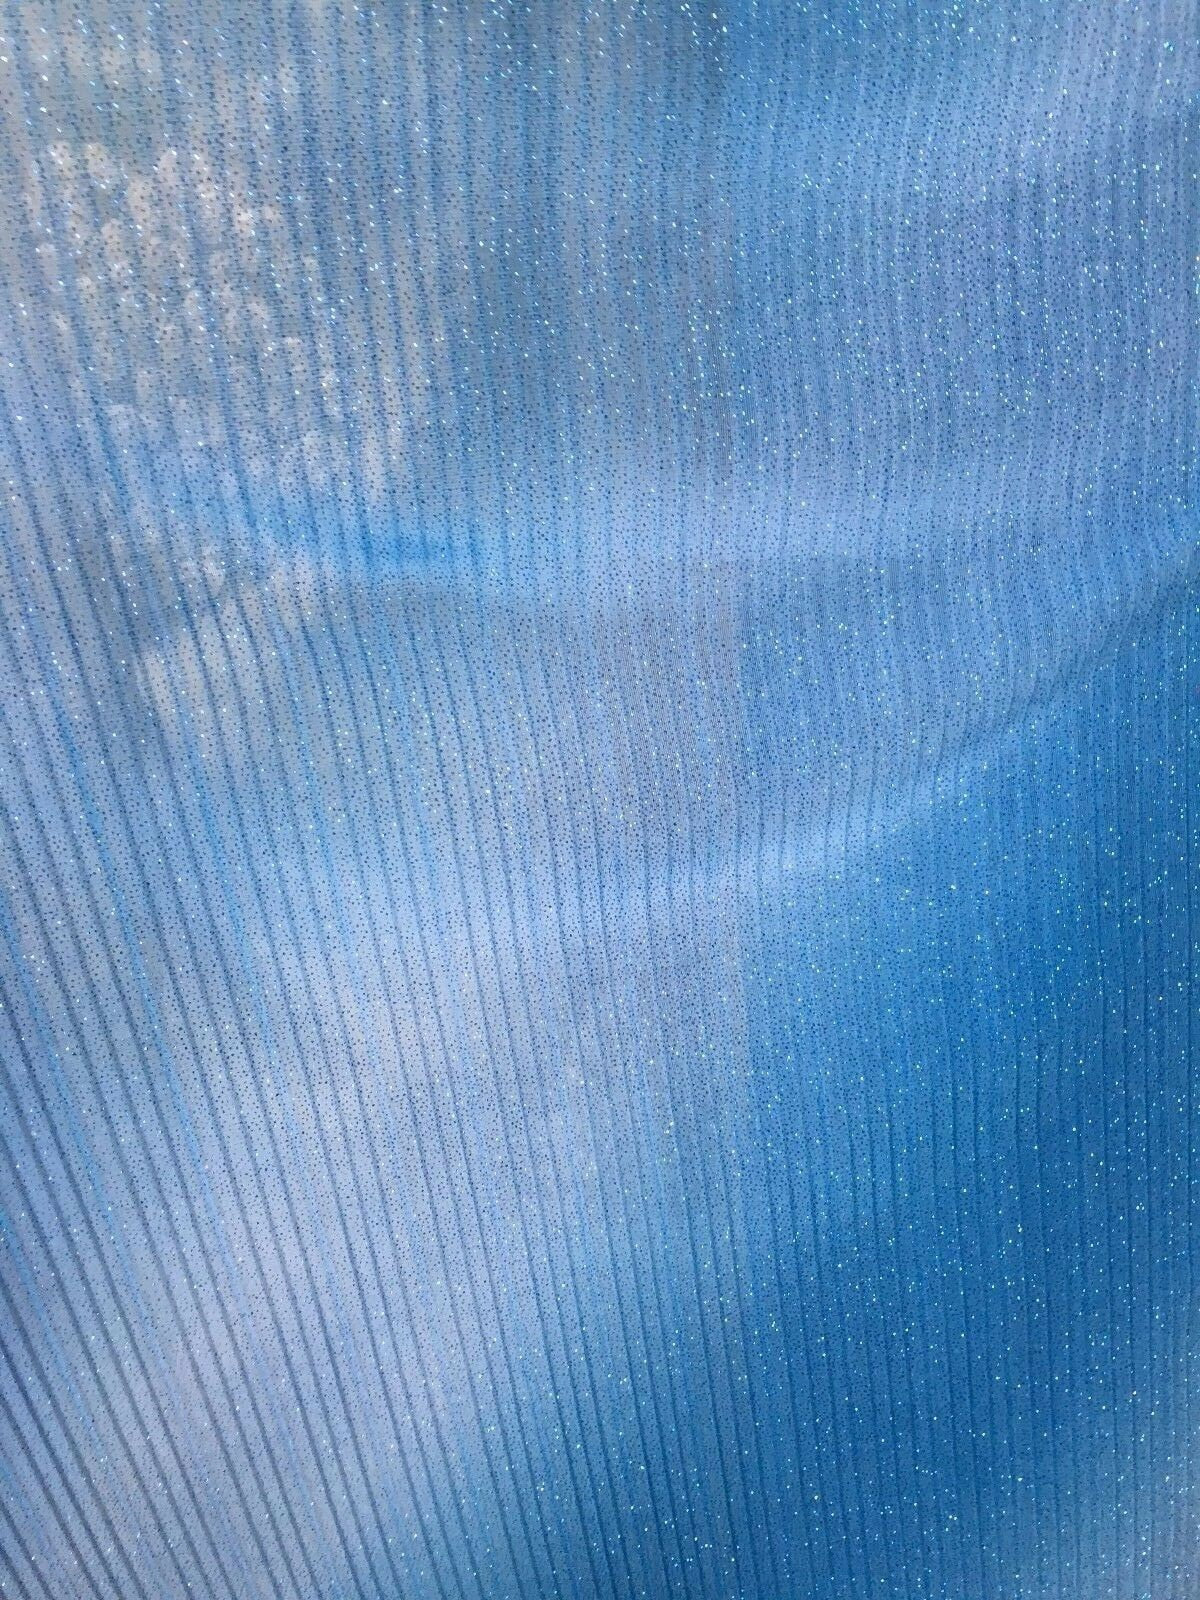 BLUE Pleated Sparkle Polyester Stretch Fabric (60 in.) Sold By The Yard